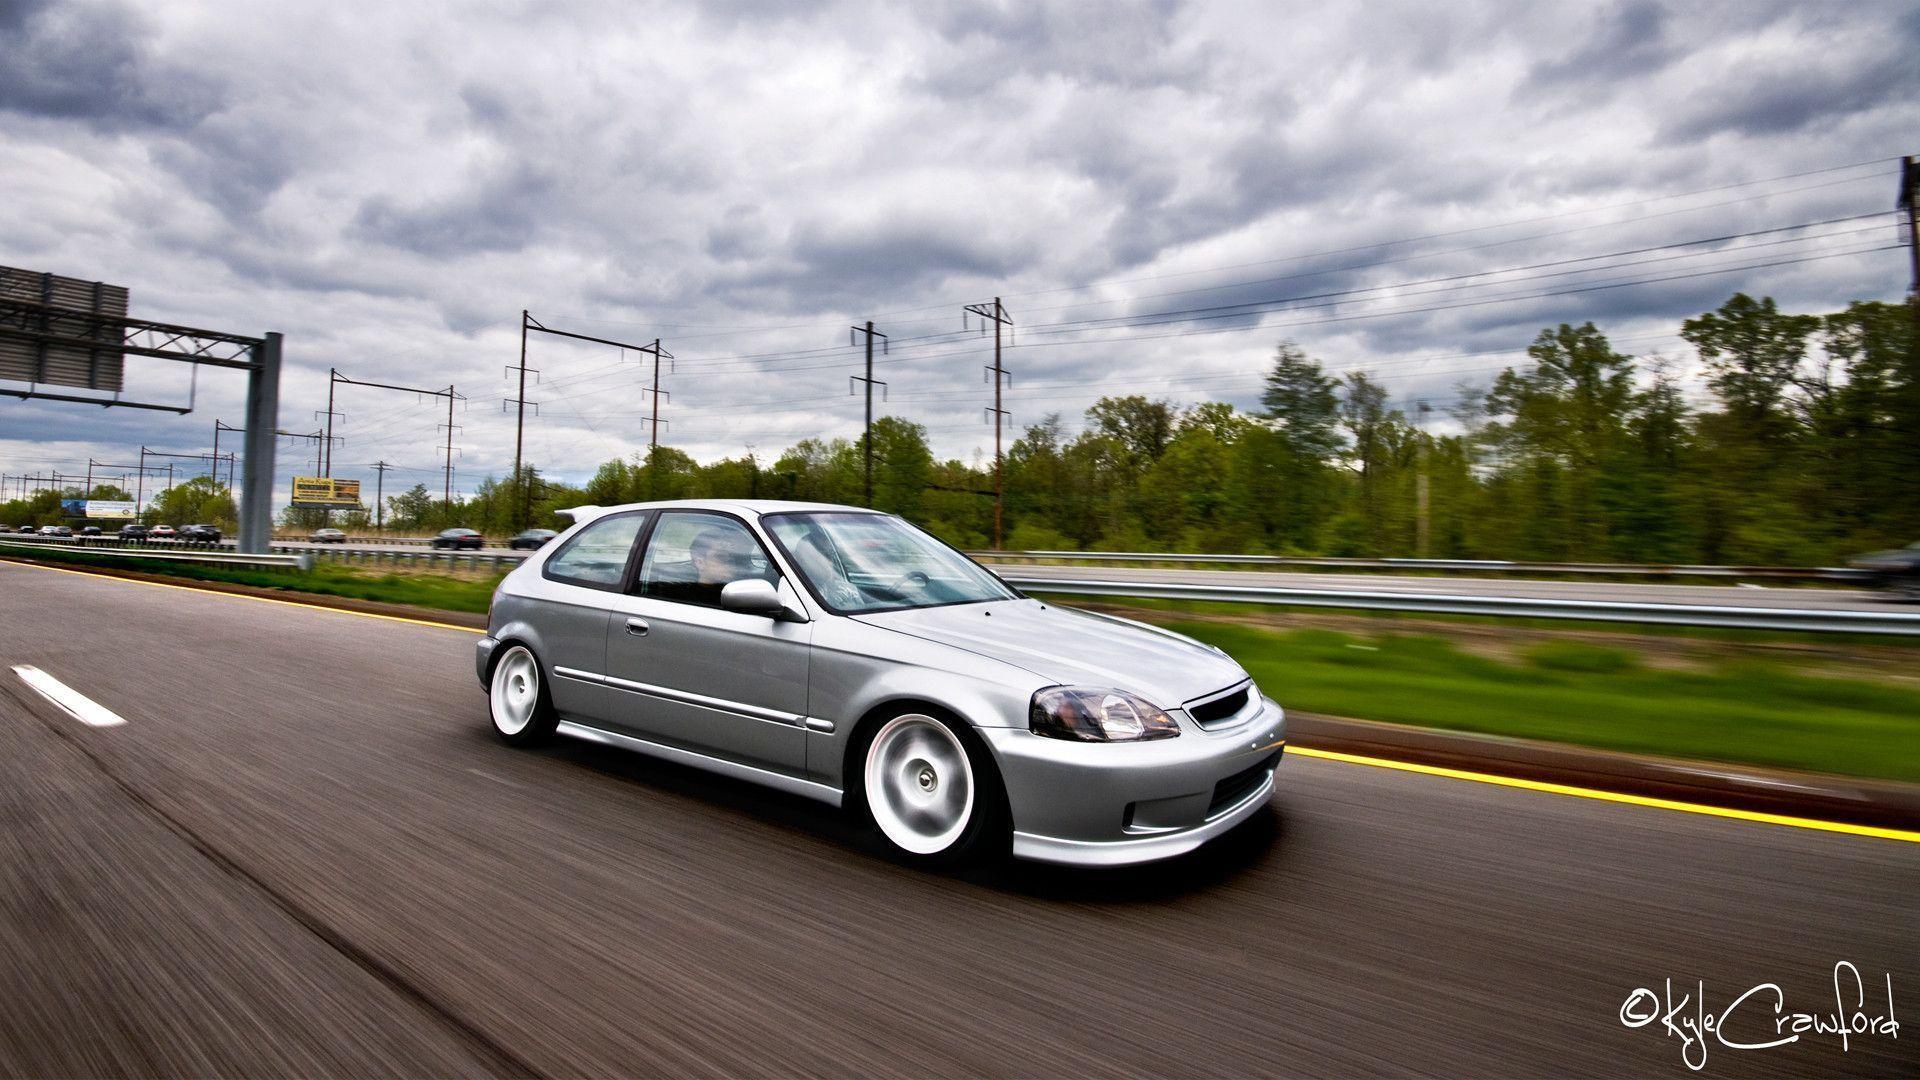 Honda Civic Jdm Wallpaper Honda Civic Jdm Wallpaper Car Picture